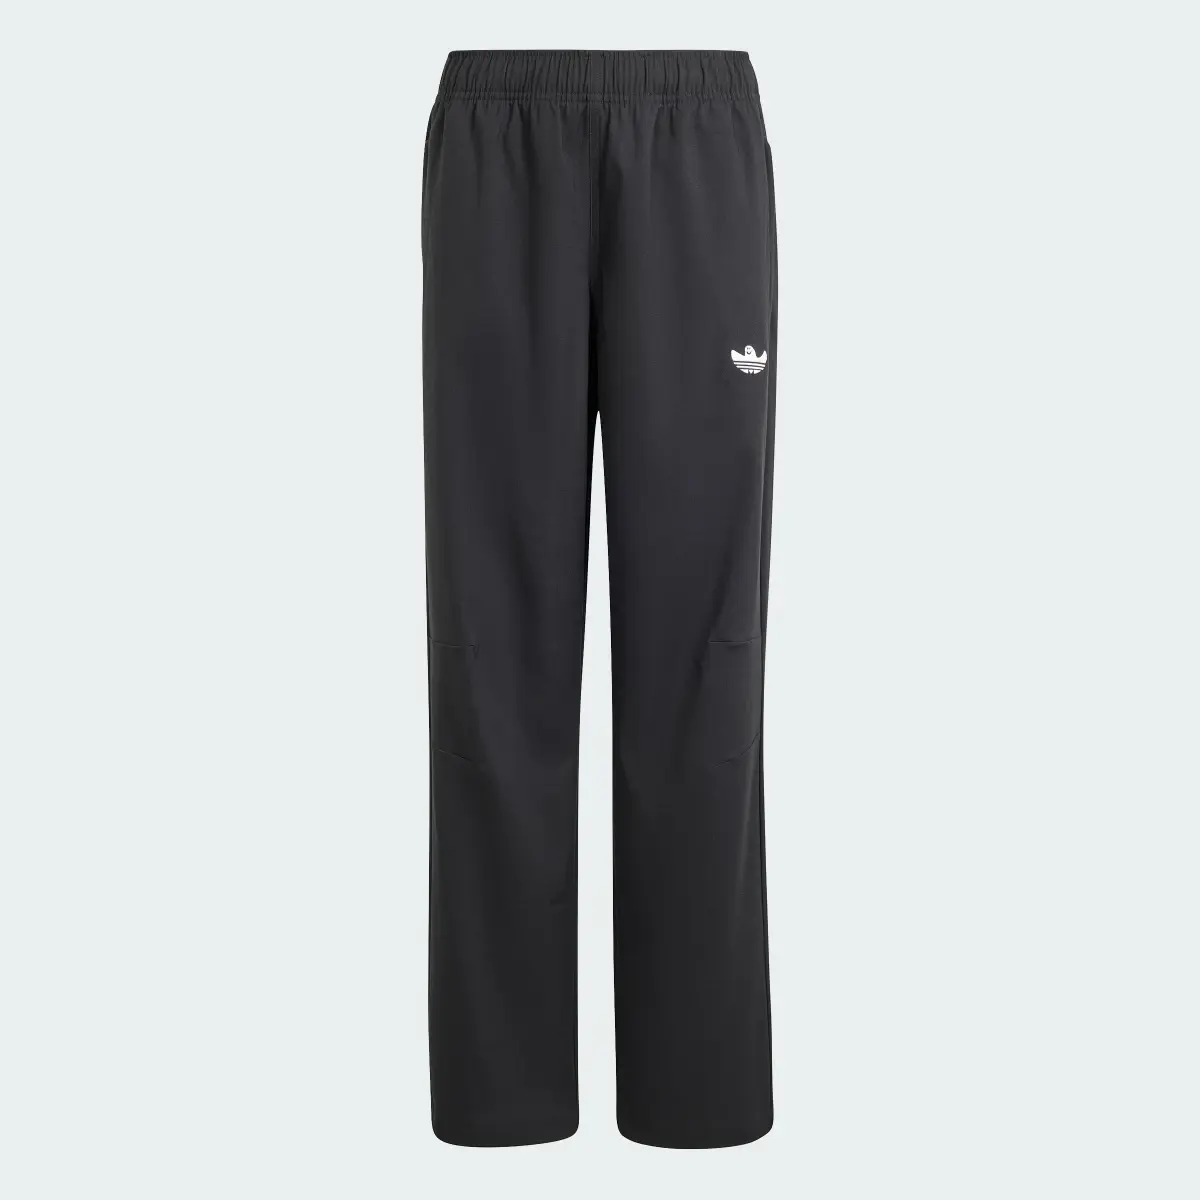 Adidas Trousers. 1